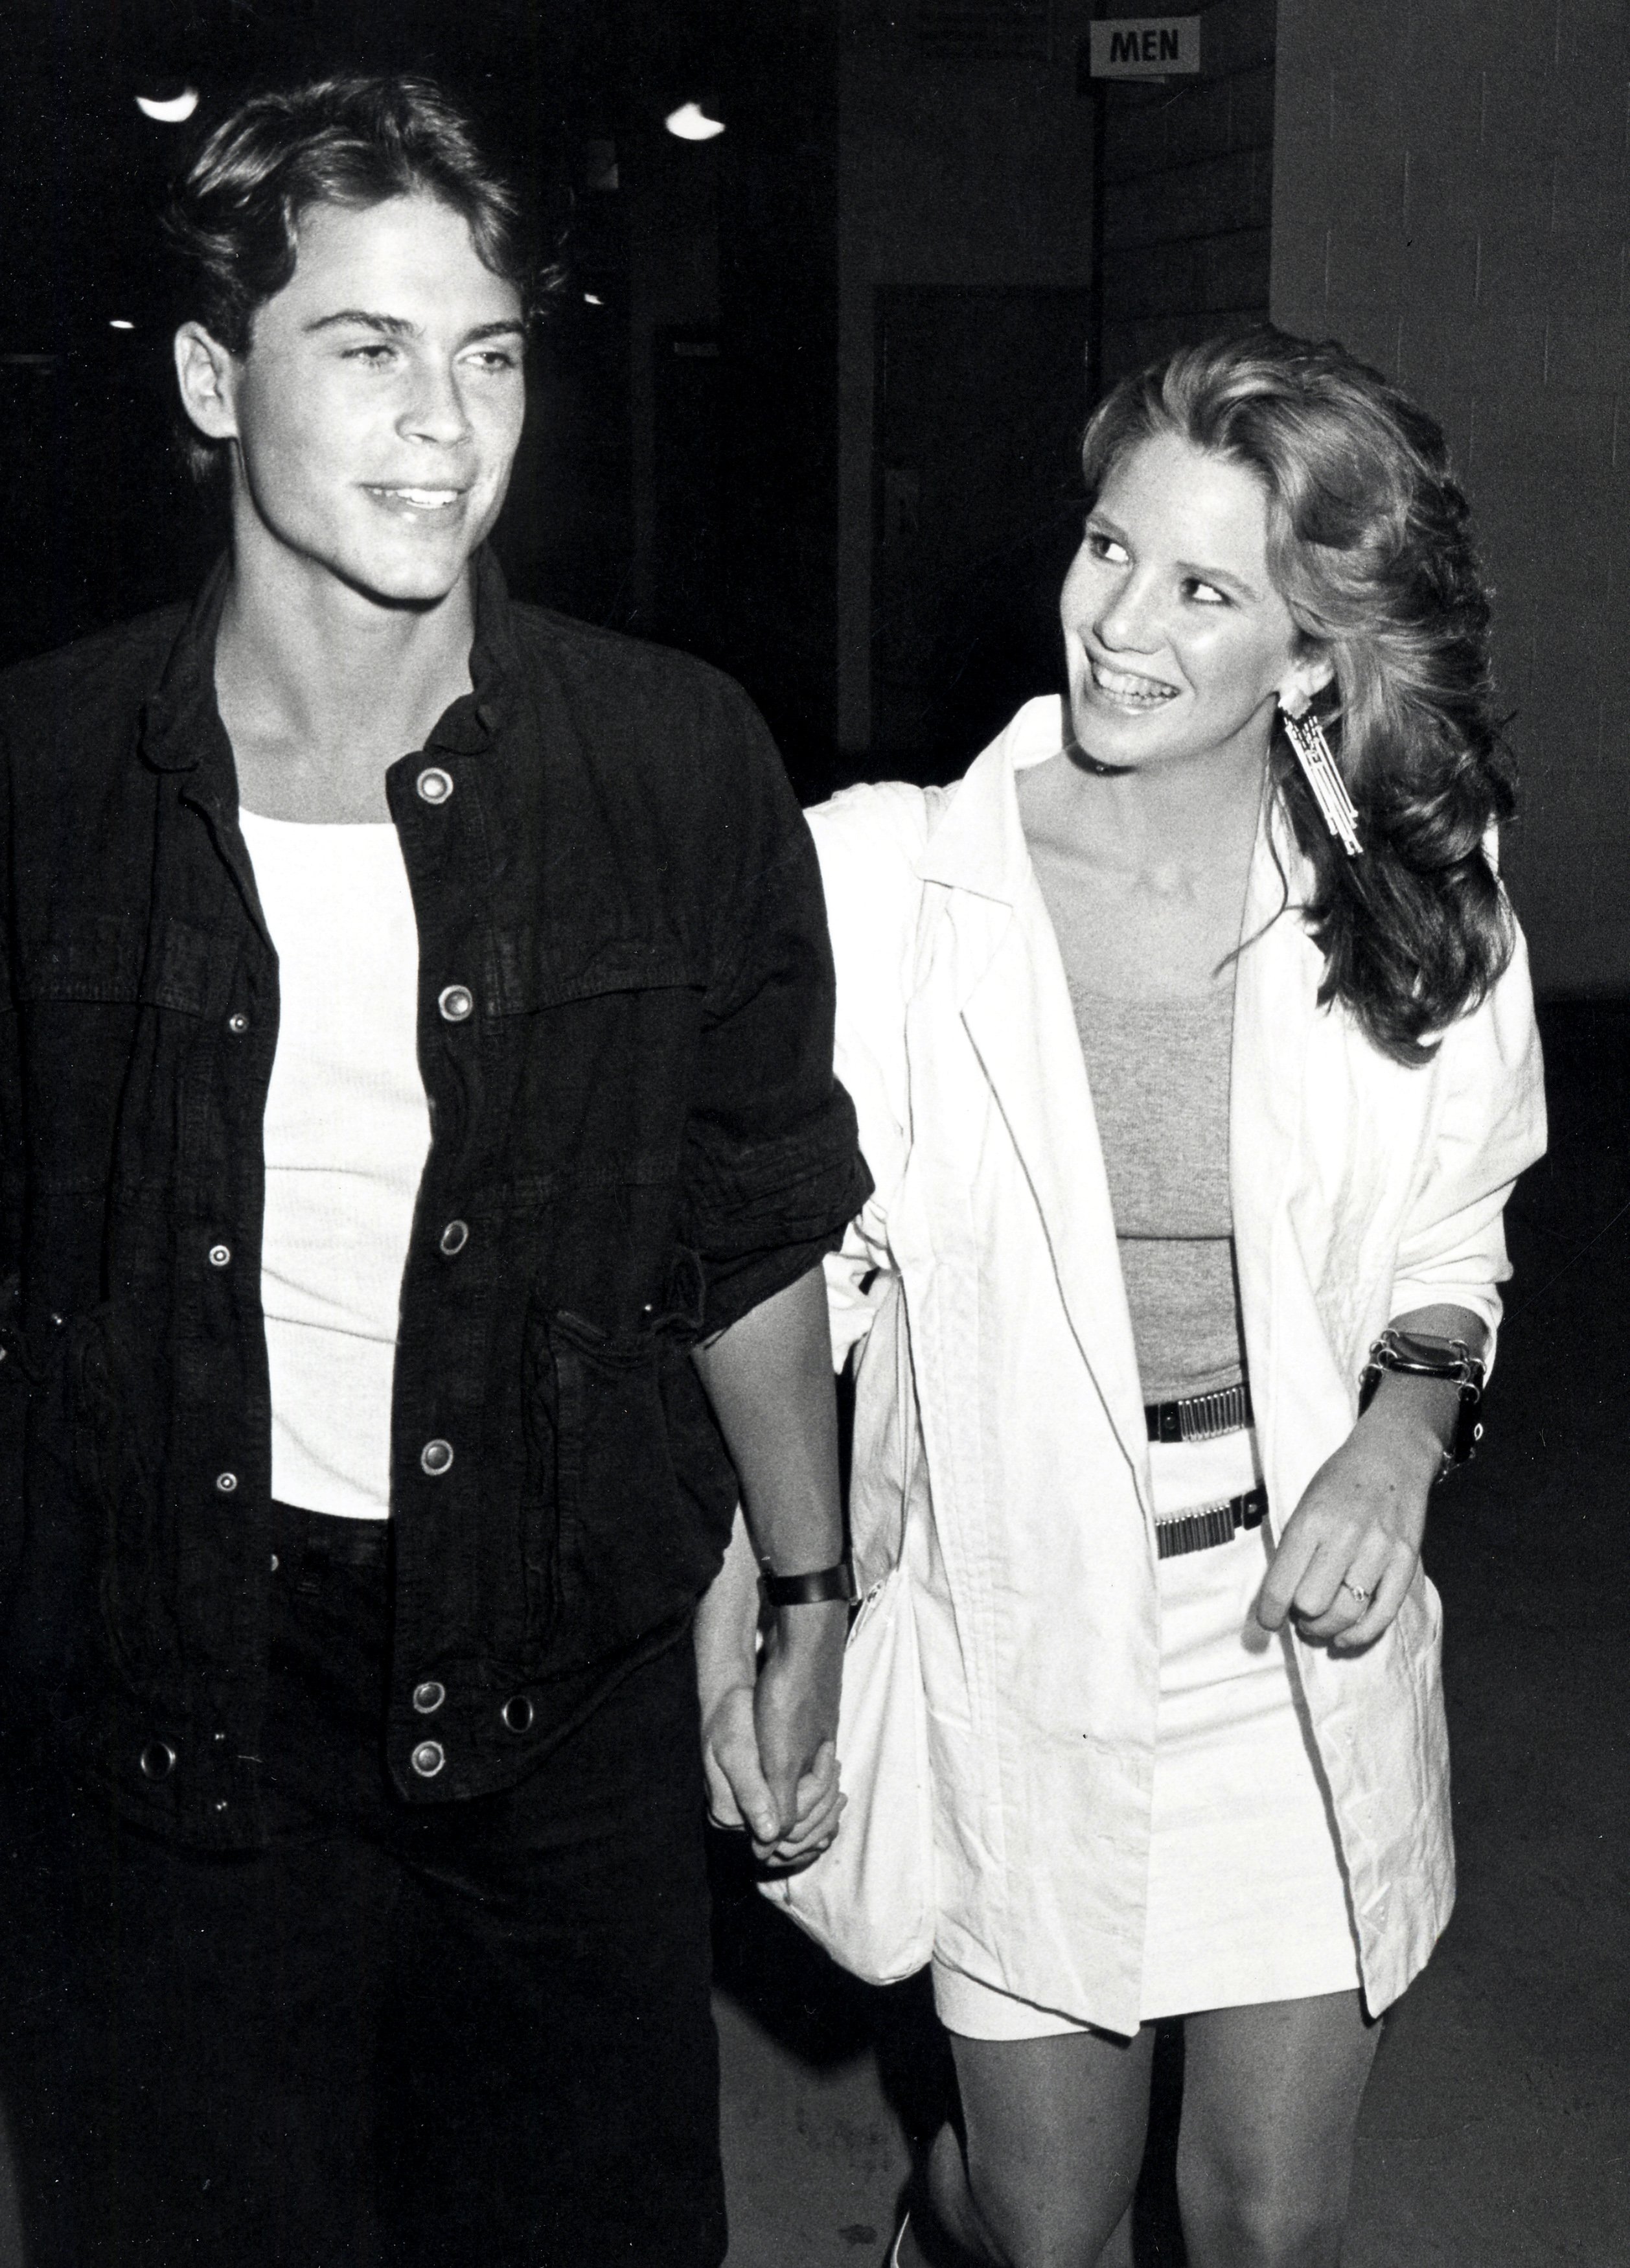 Rob Lowe and Melissa Gilbert seen at Anaheim Stadium in Anaheim, California on September 9, 1983 | Source: Getty Images